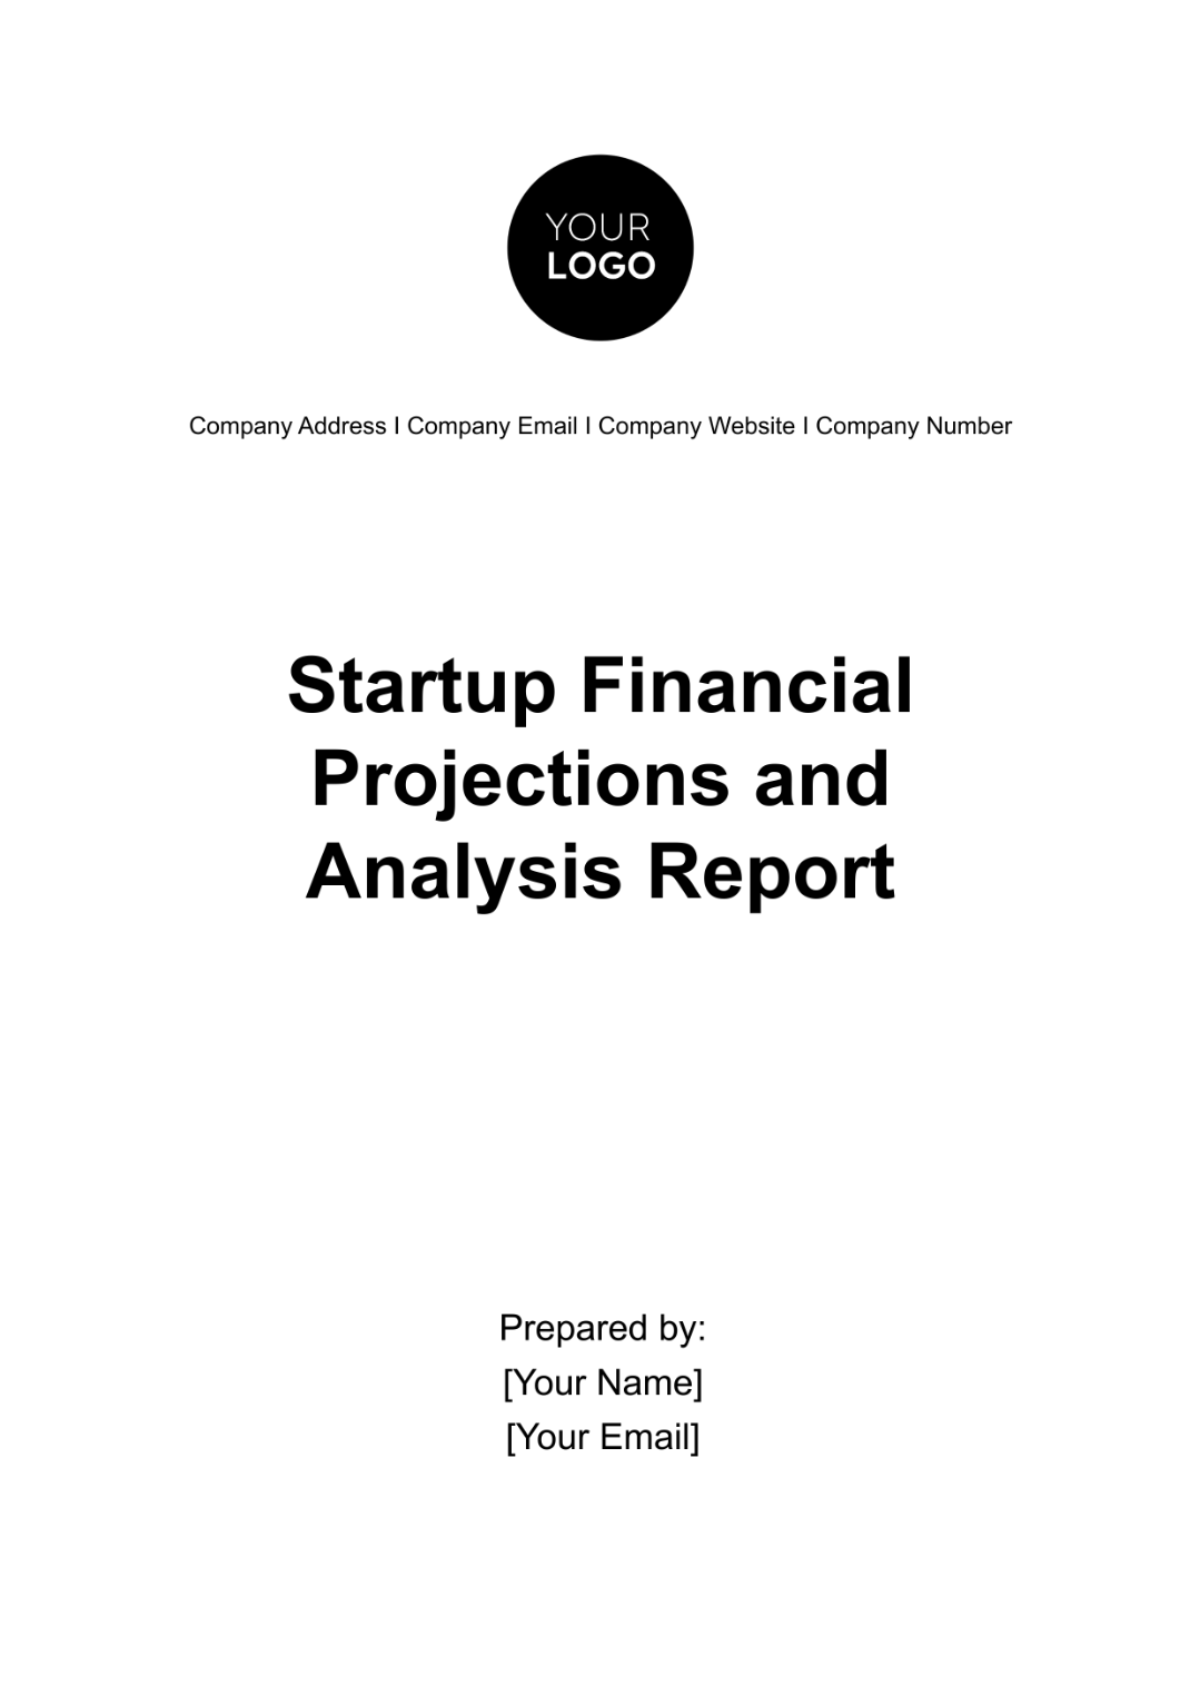 Startup Financial Projections and Analysis Report Template